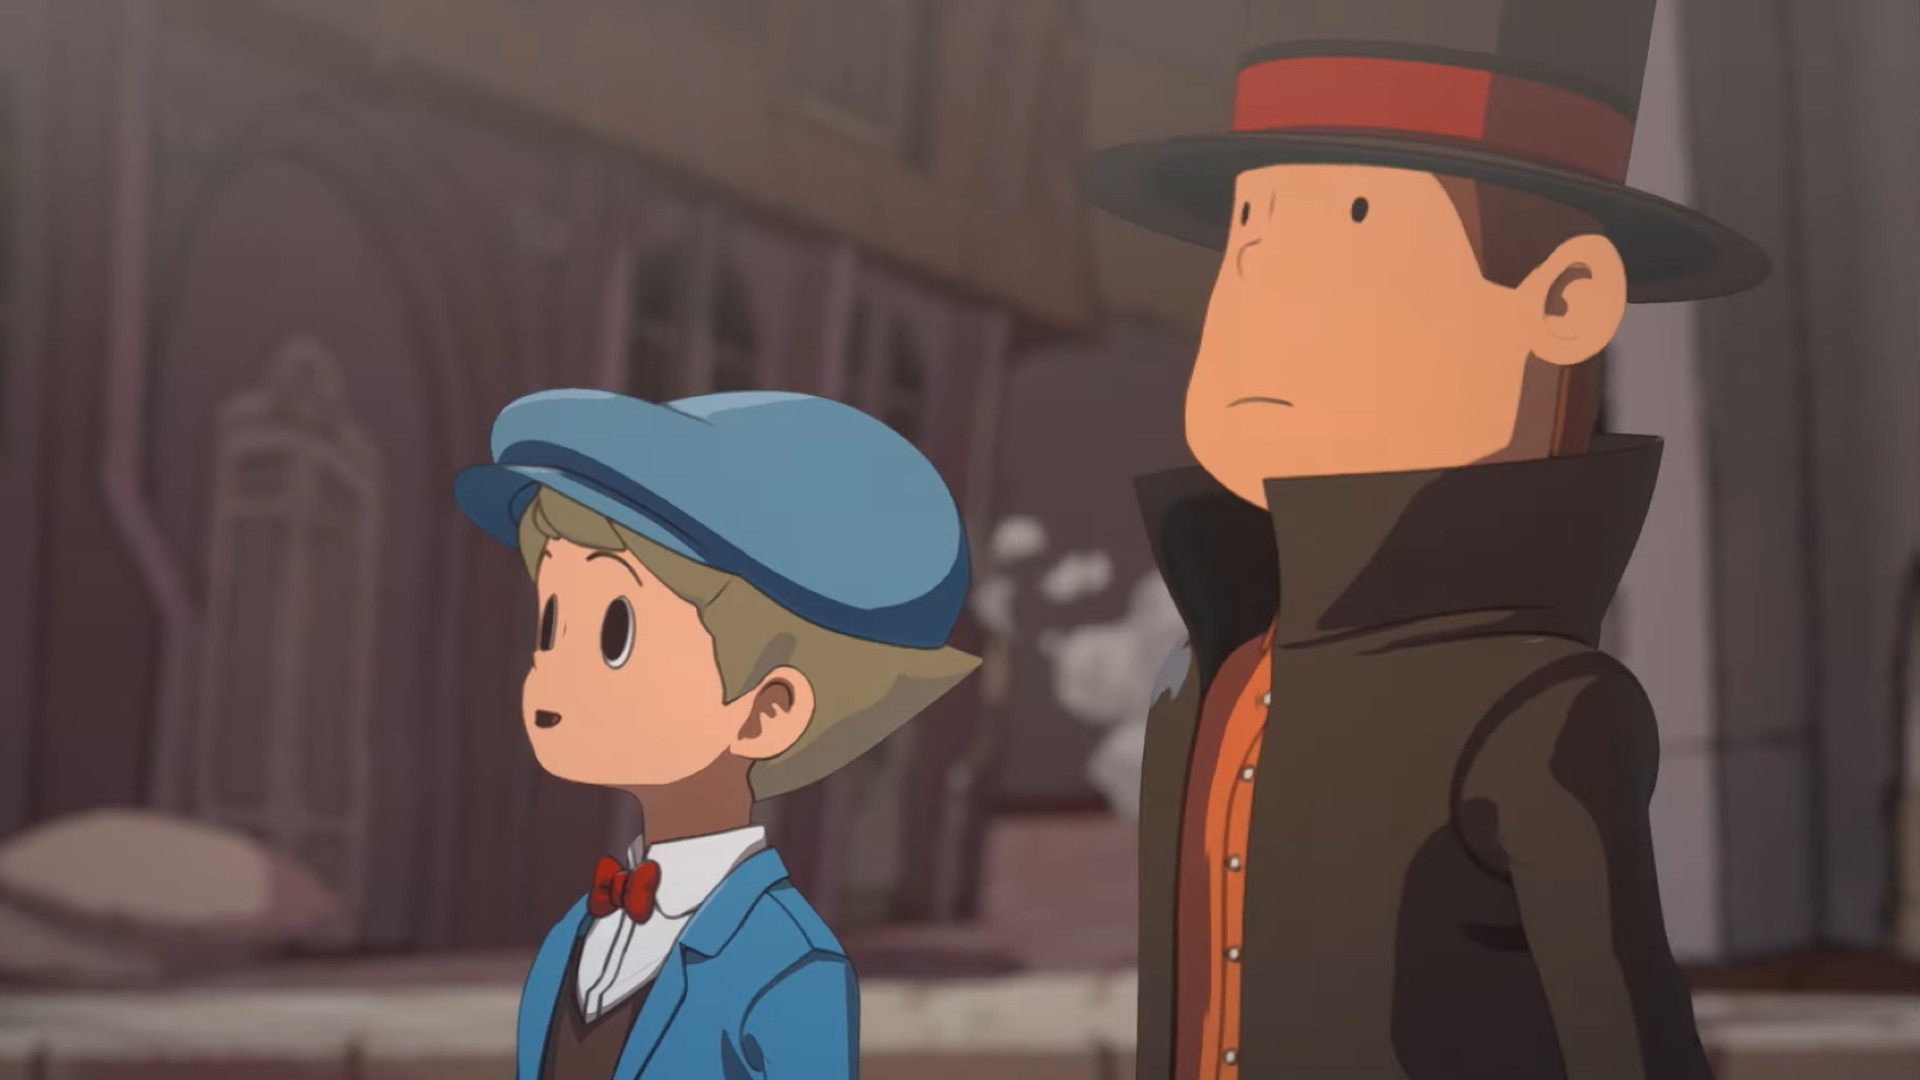 Professor Layton studio CEO wants to make "erotic" and "violent" games one day and I'm afraid of what that means